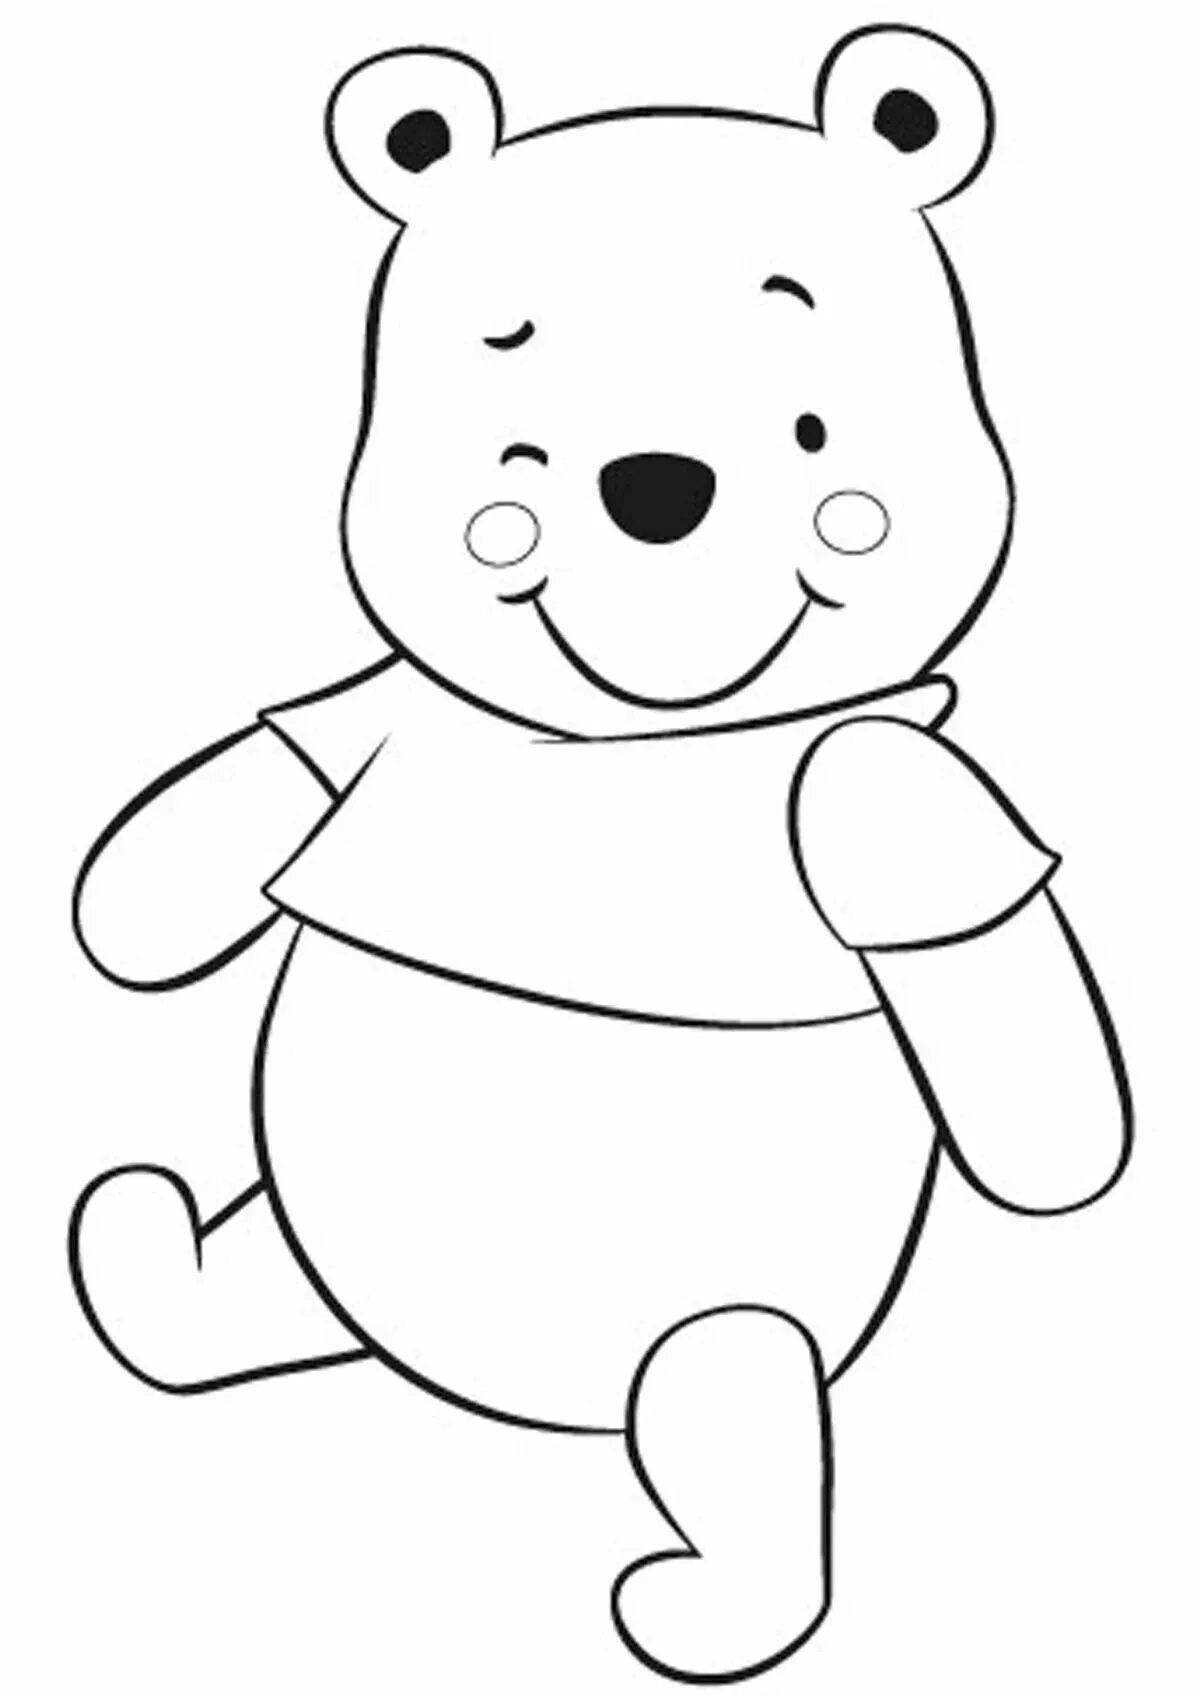 Fancy bear coloring page